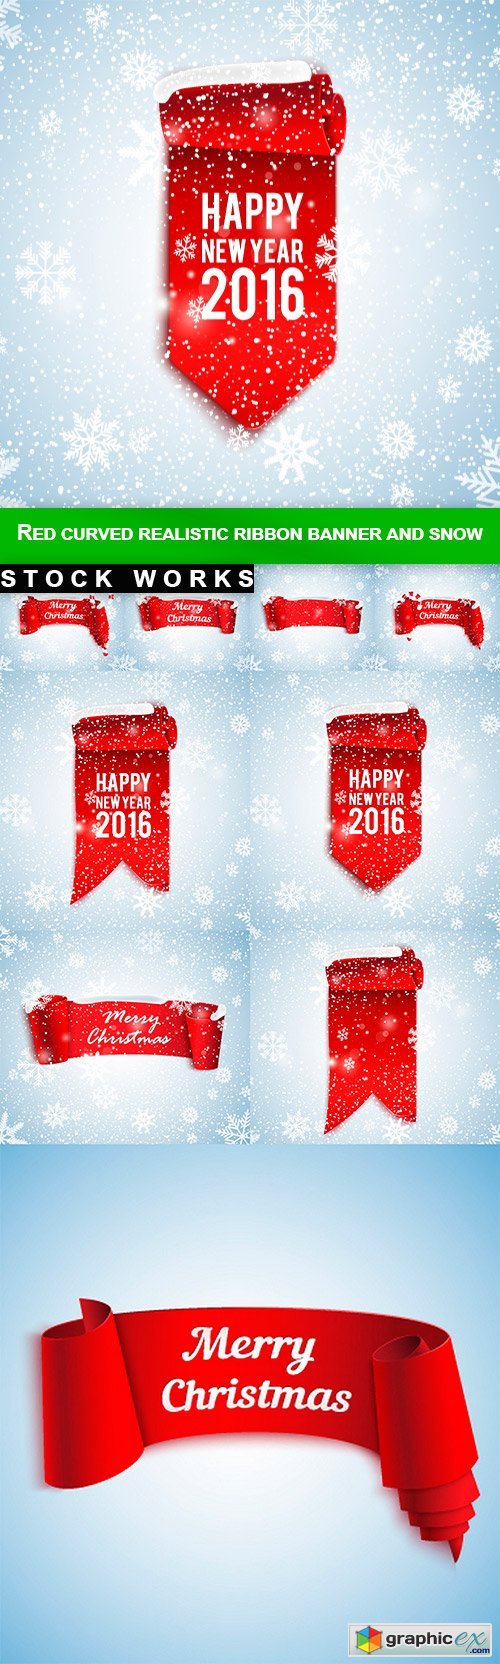 Red curved realistic ribbon banner and snow - 9 EPS